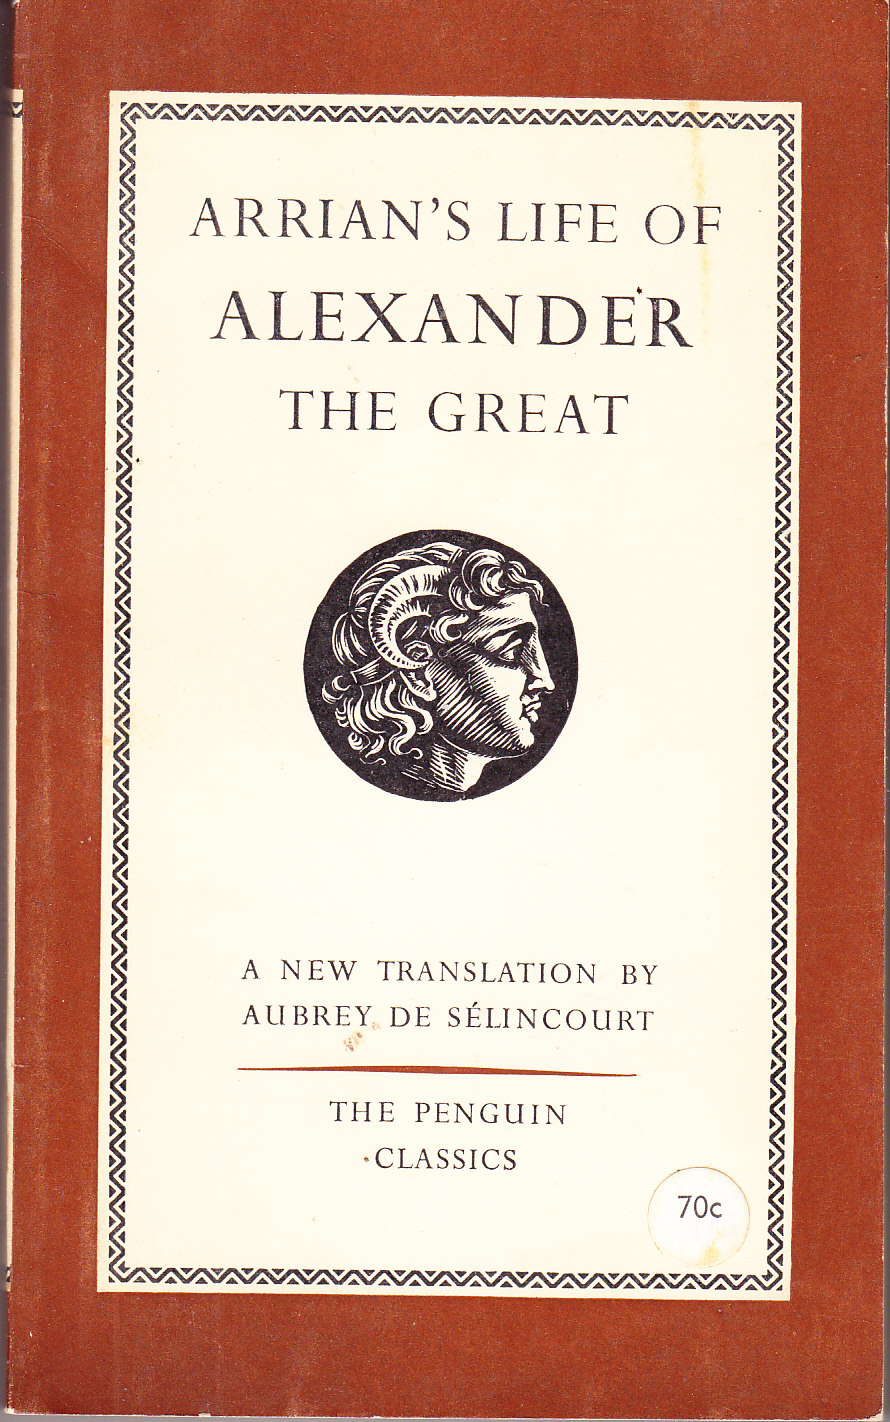 Life of Alexander the Great - Arrian